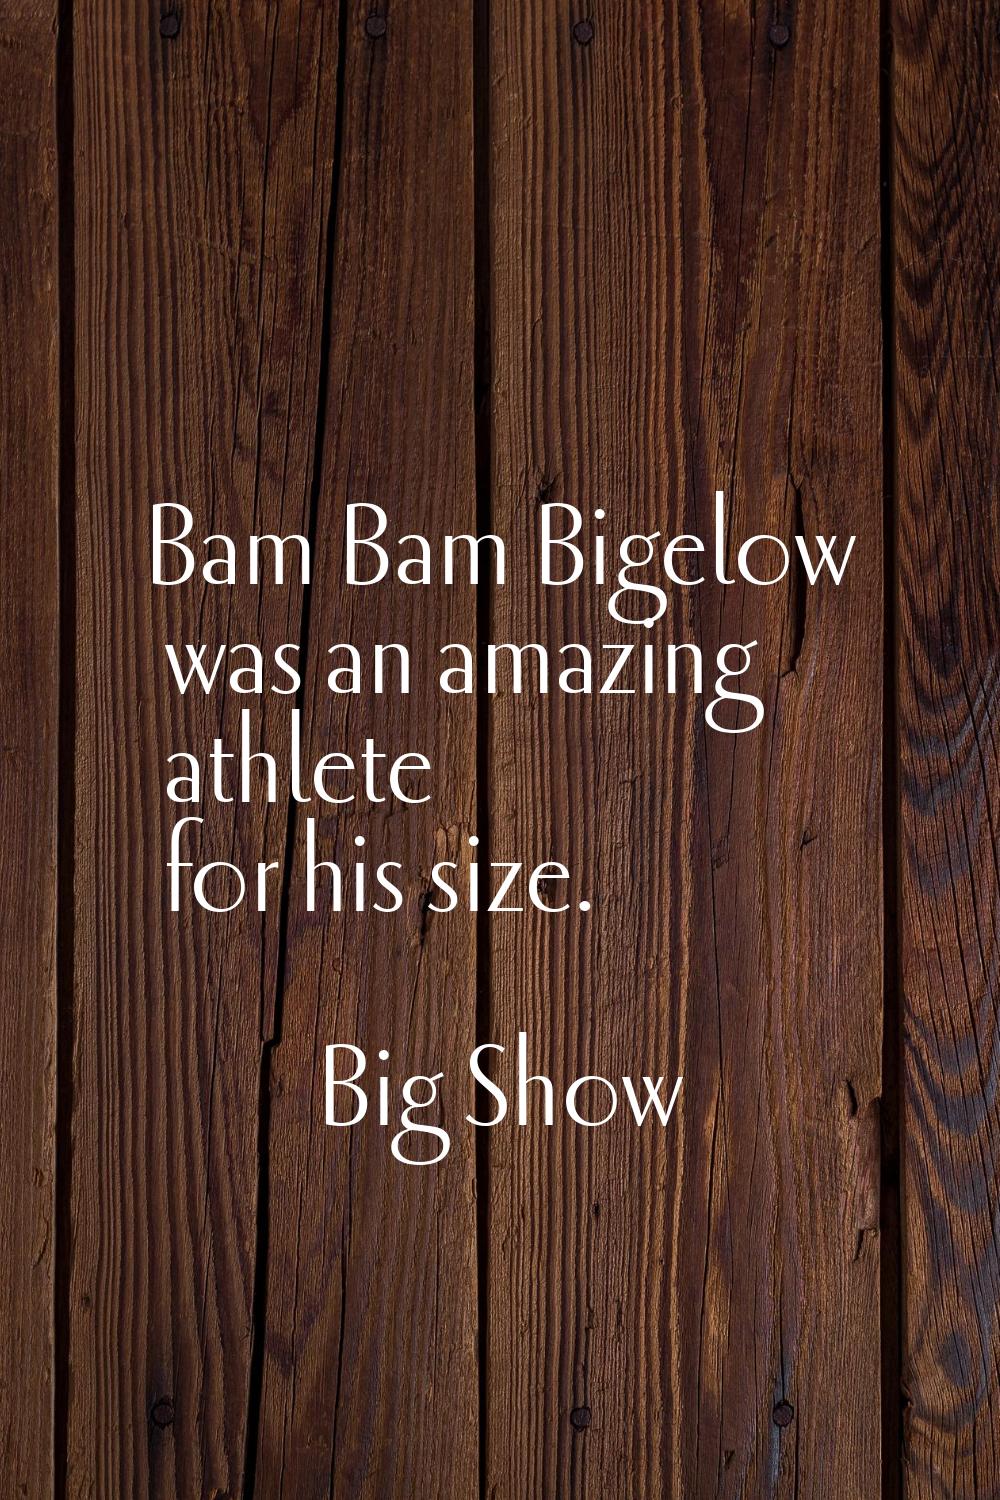 Bam Bam Bigelow was an amazing athlete for his size.